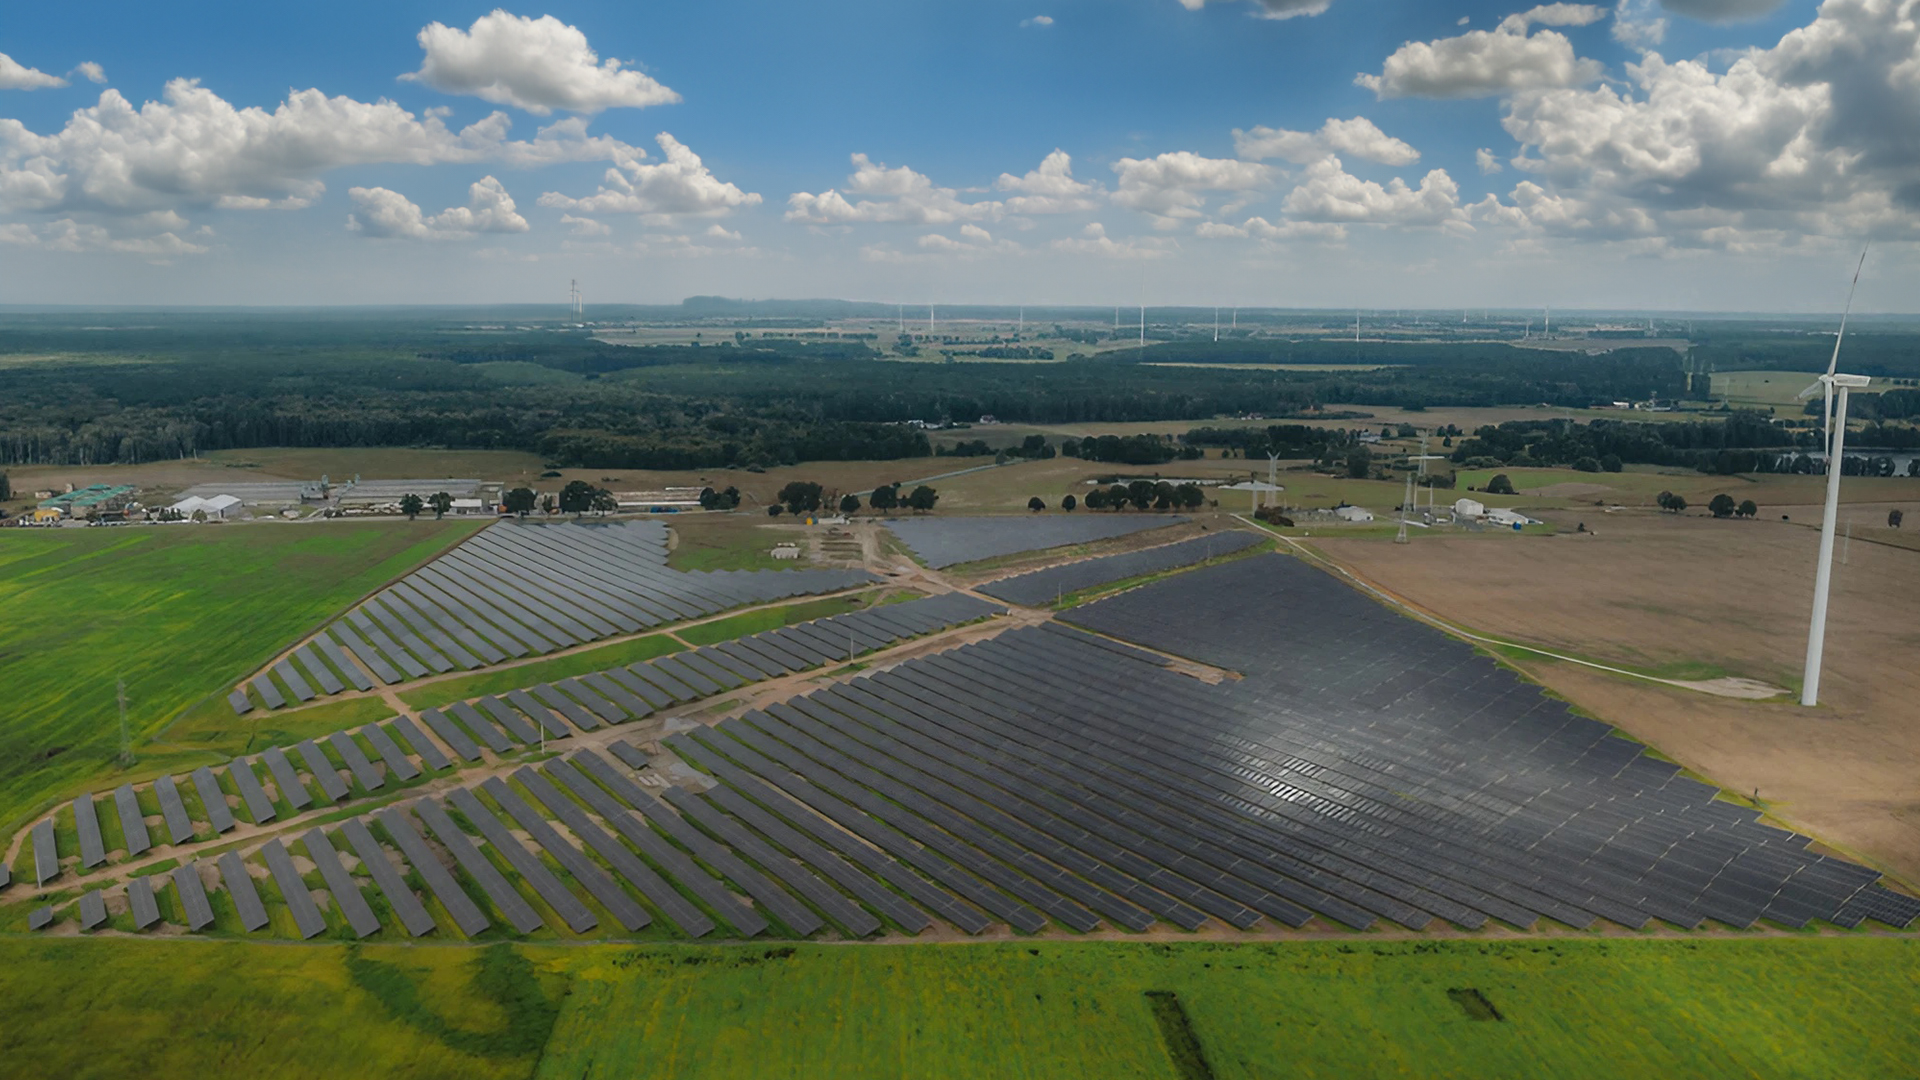 Electrum has completed the construction of the first photovoltaic farm in collaboration with Nofar Energy and announces the upcoming joint venture project.